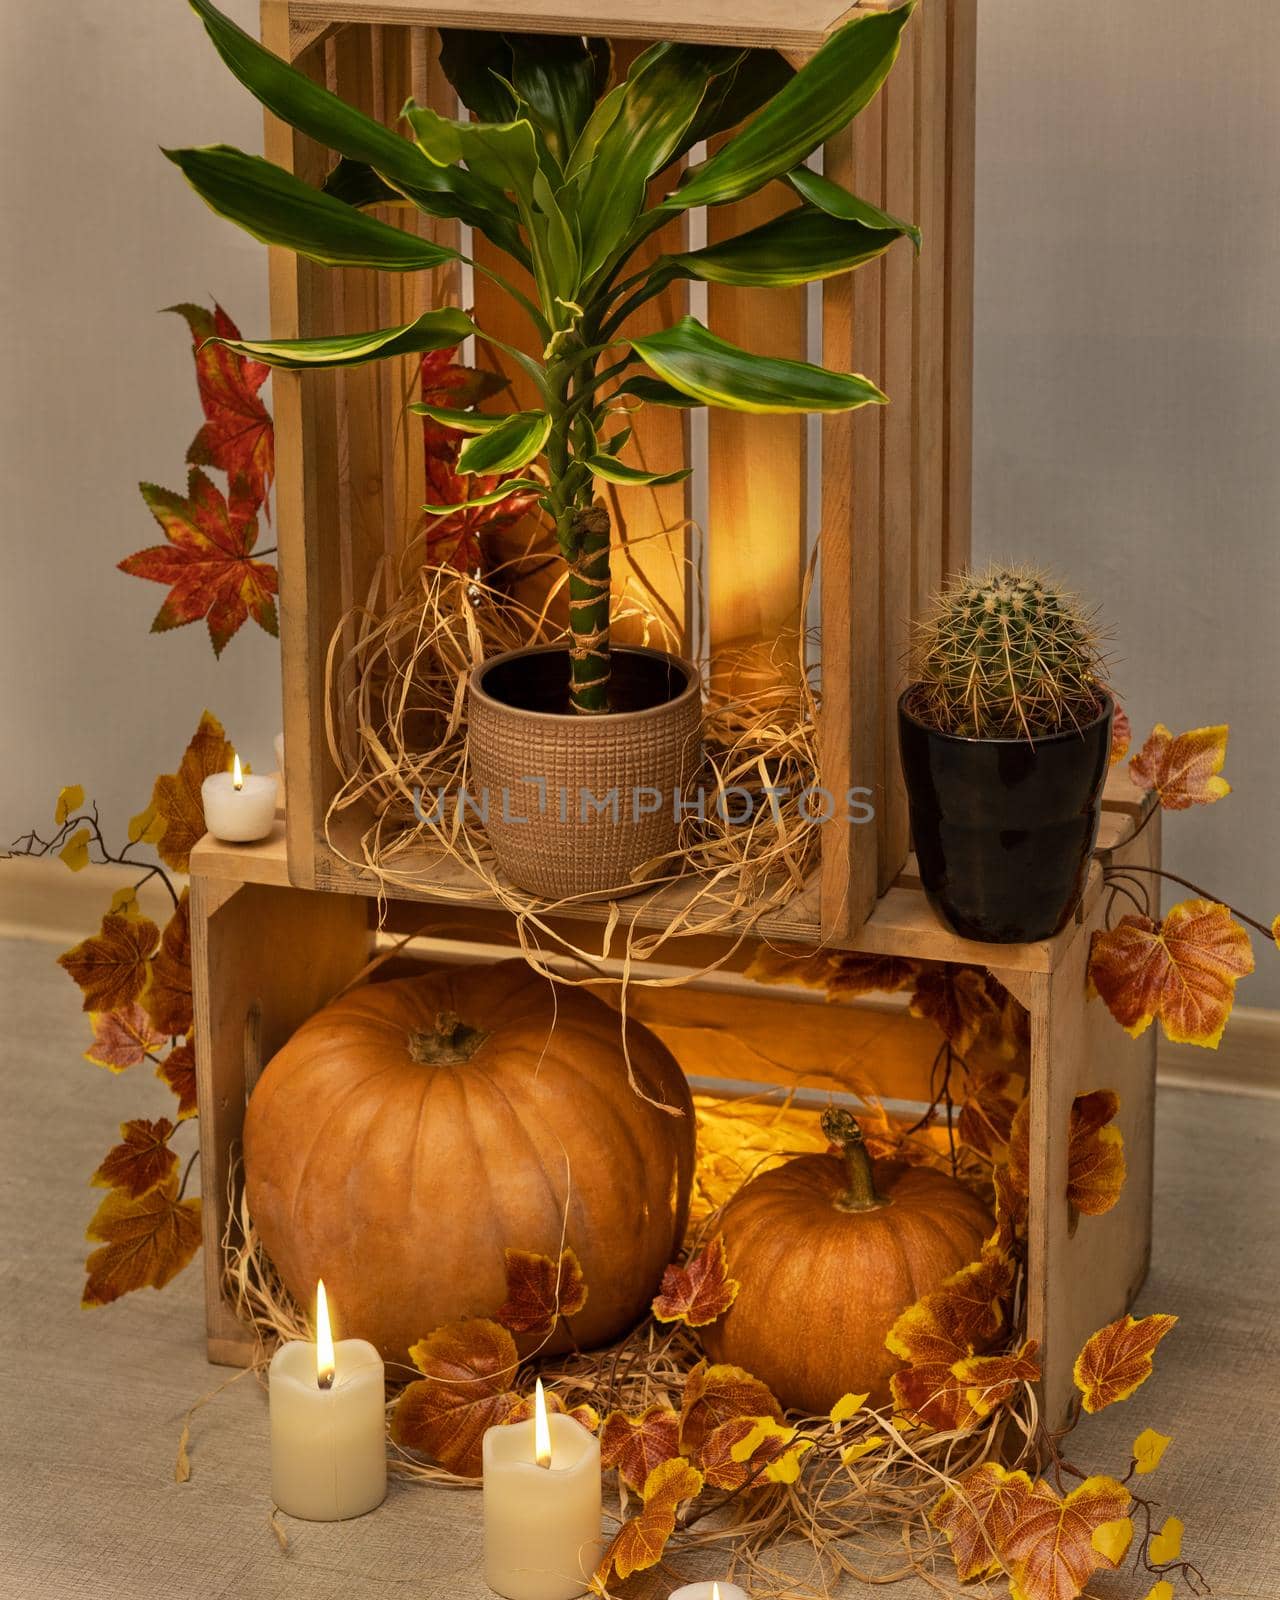 Halloween Pumpkins in the wooden crates with candles, Dracaena fragrans Golden Coast, cactus by ferhad